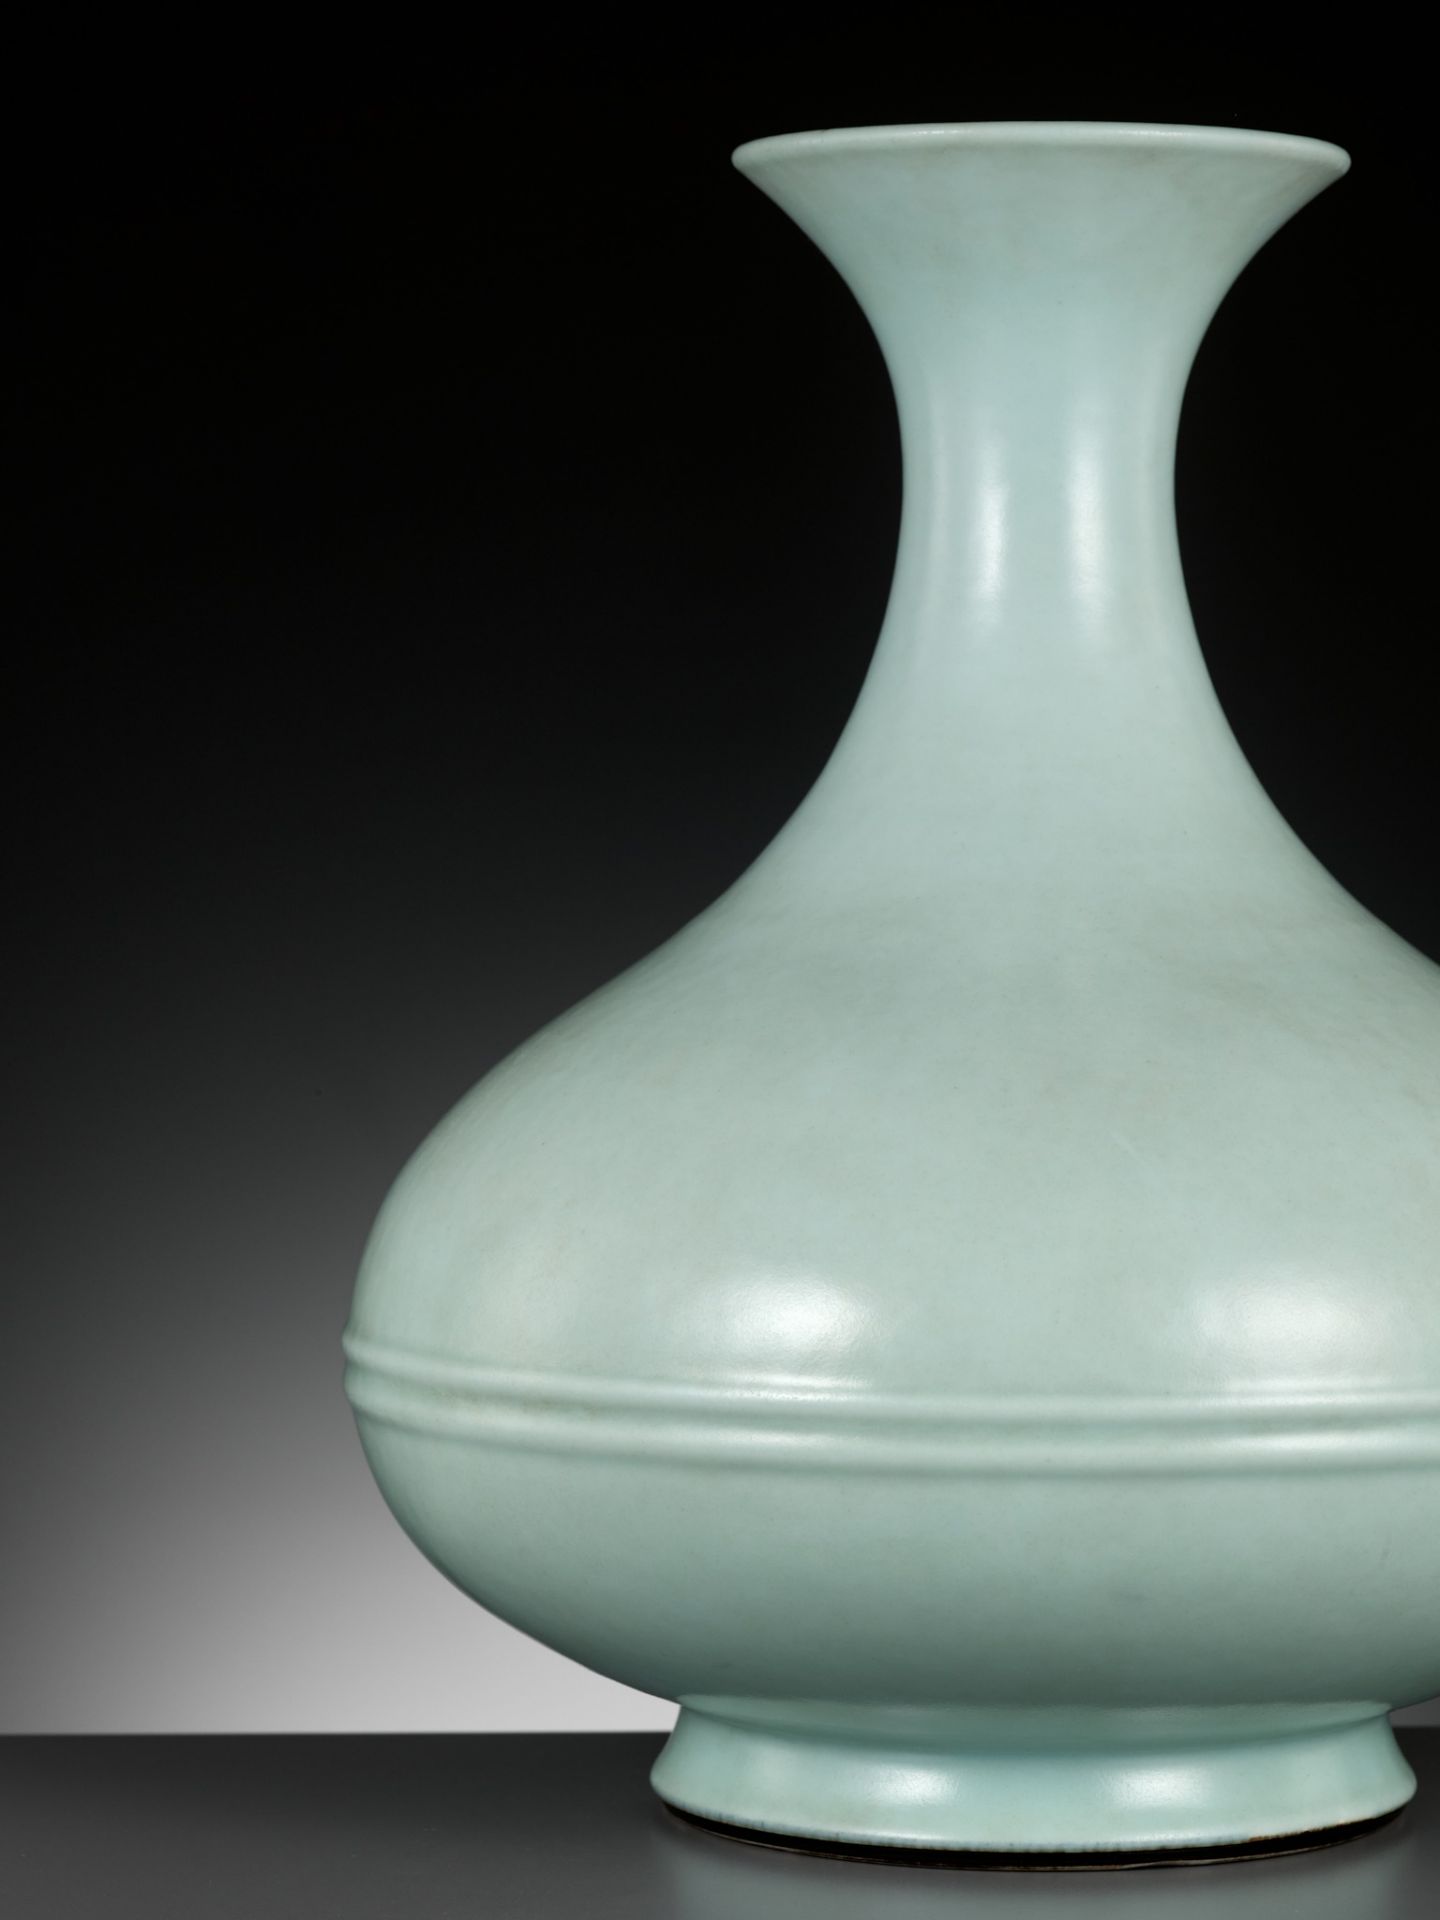 A CELADON-GLAZED PEAR-SHAPED VASE, YONGZHENG MARK AND OF THE PERIOD